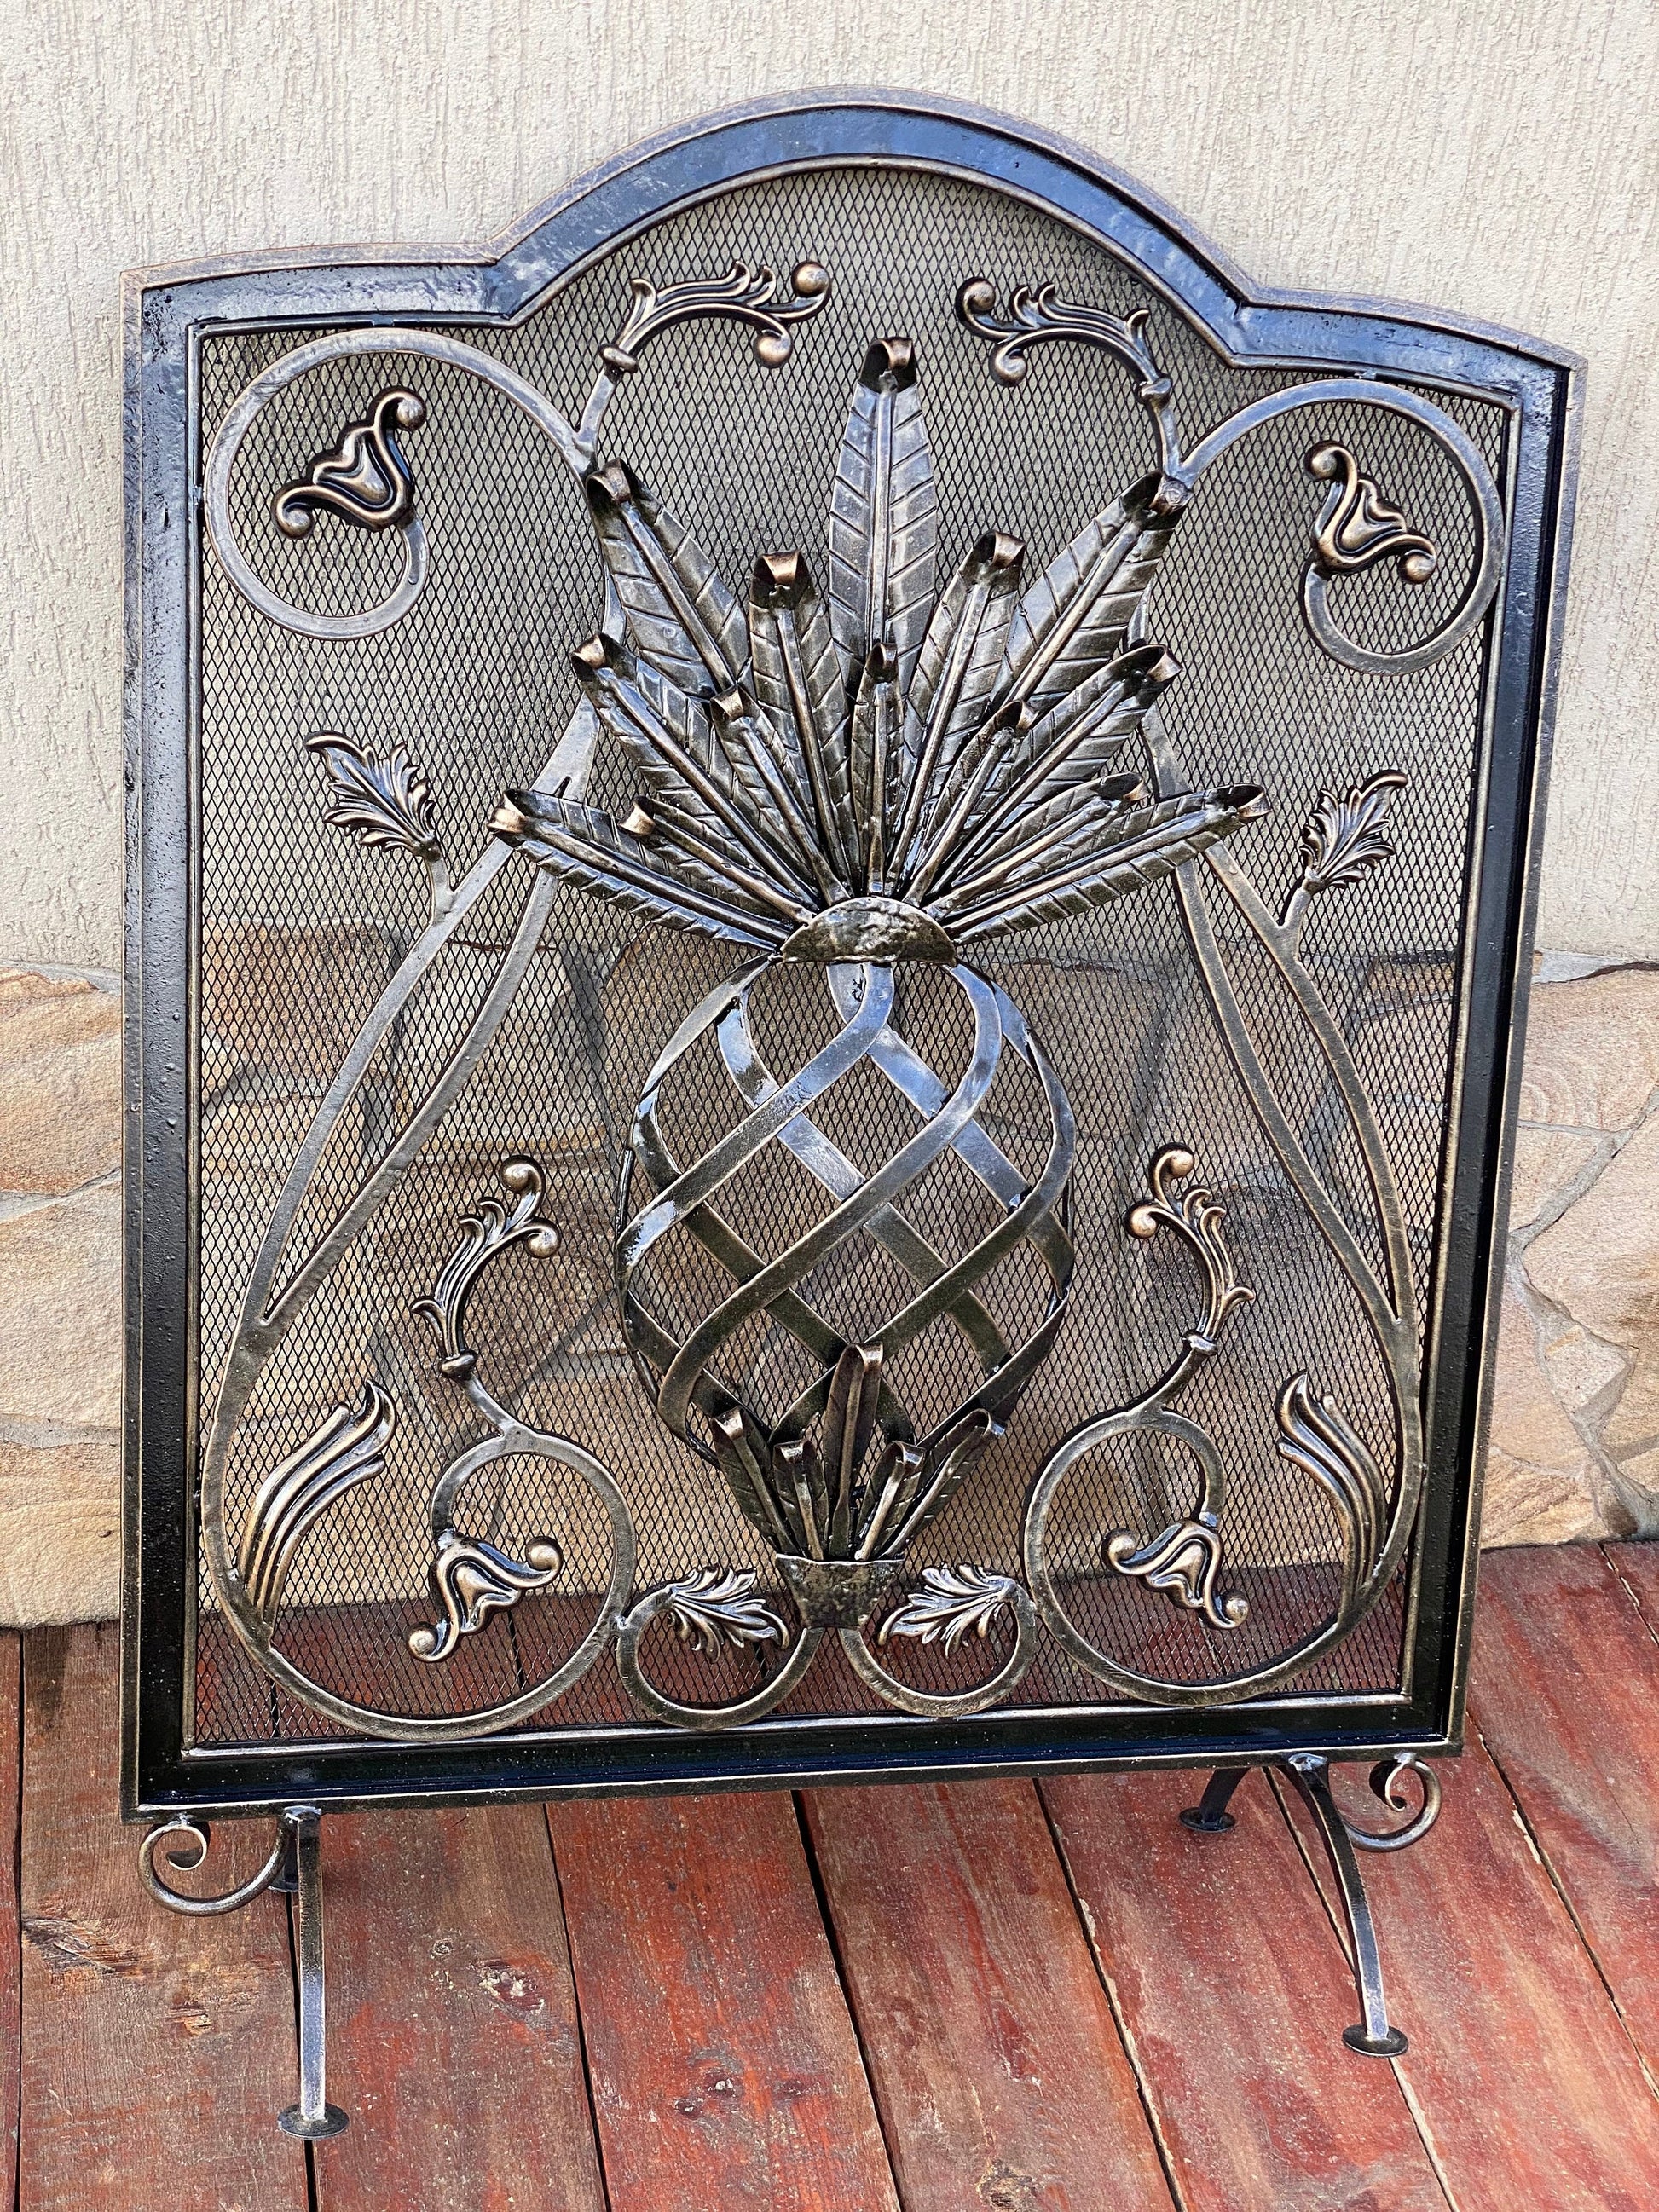 Fireplace screen, iron gift, fireplace decor, fire poker, anniversary gift, pineapple, fireplace, Christmas, birthday, BBQ, grill, medieval